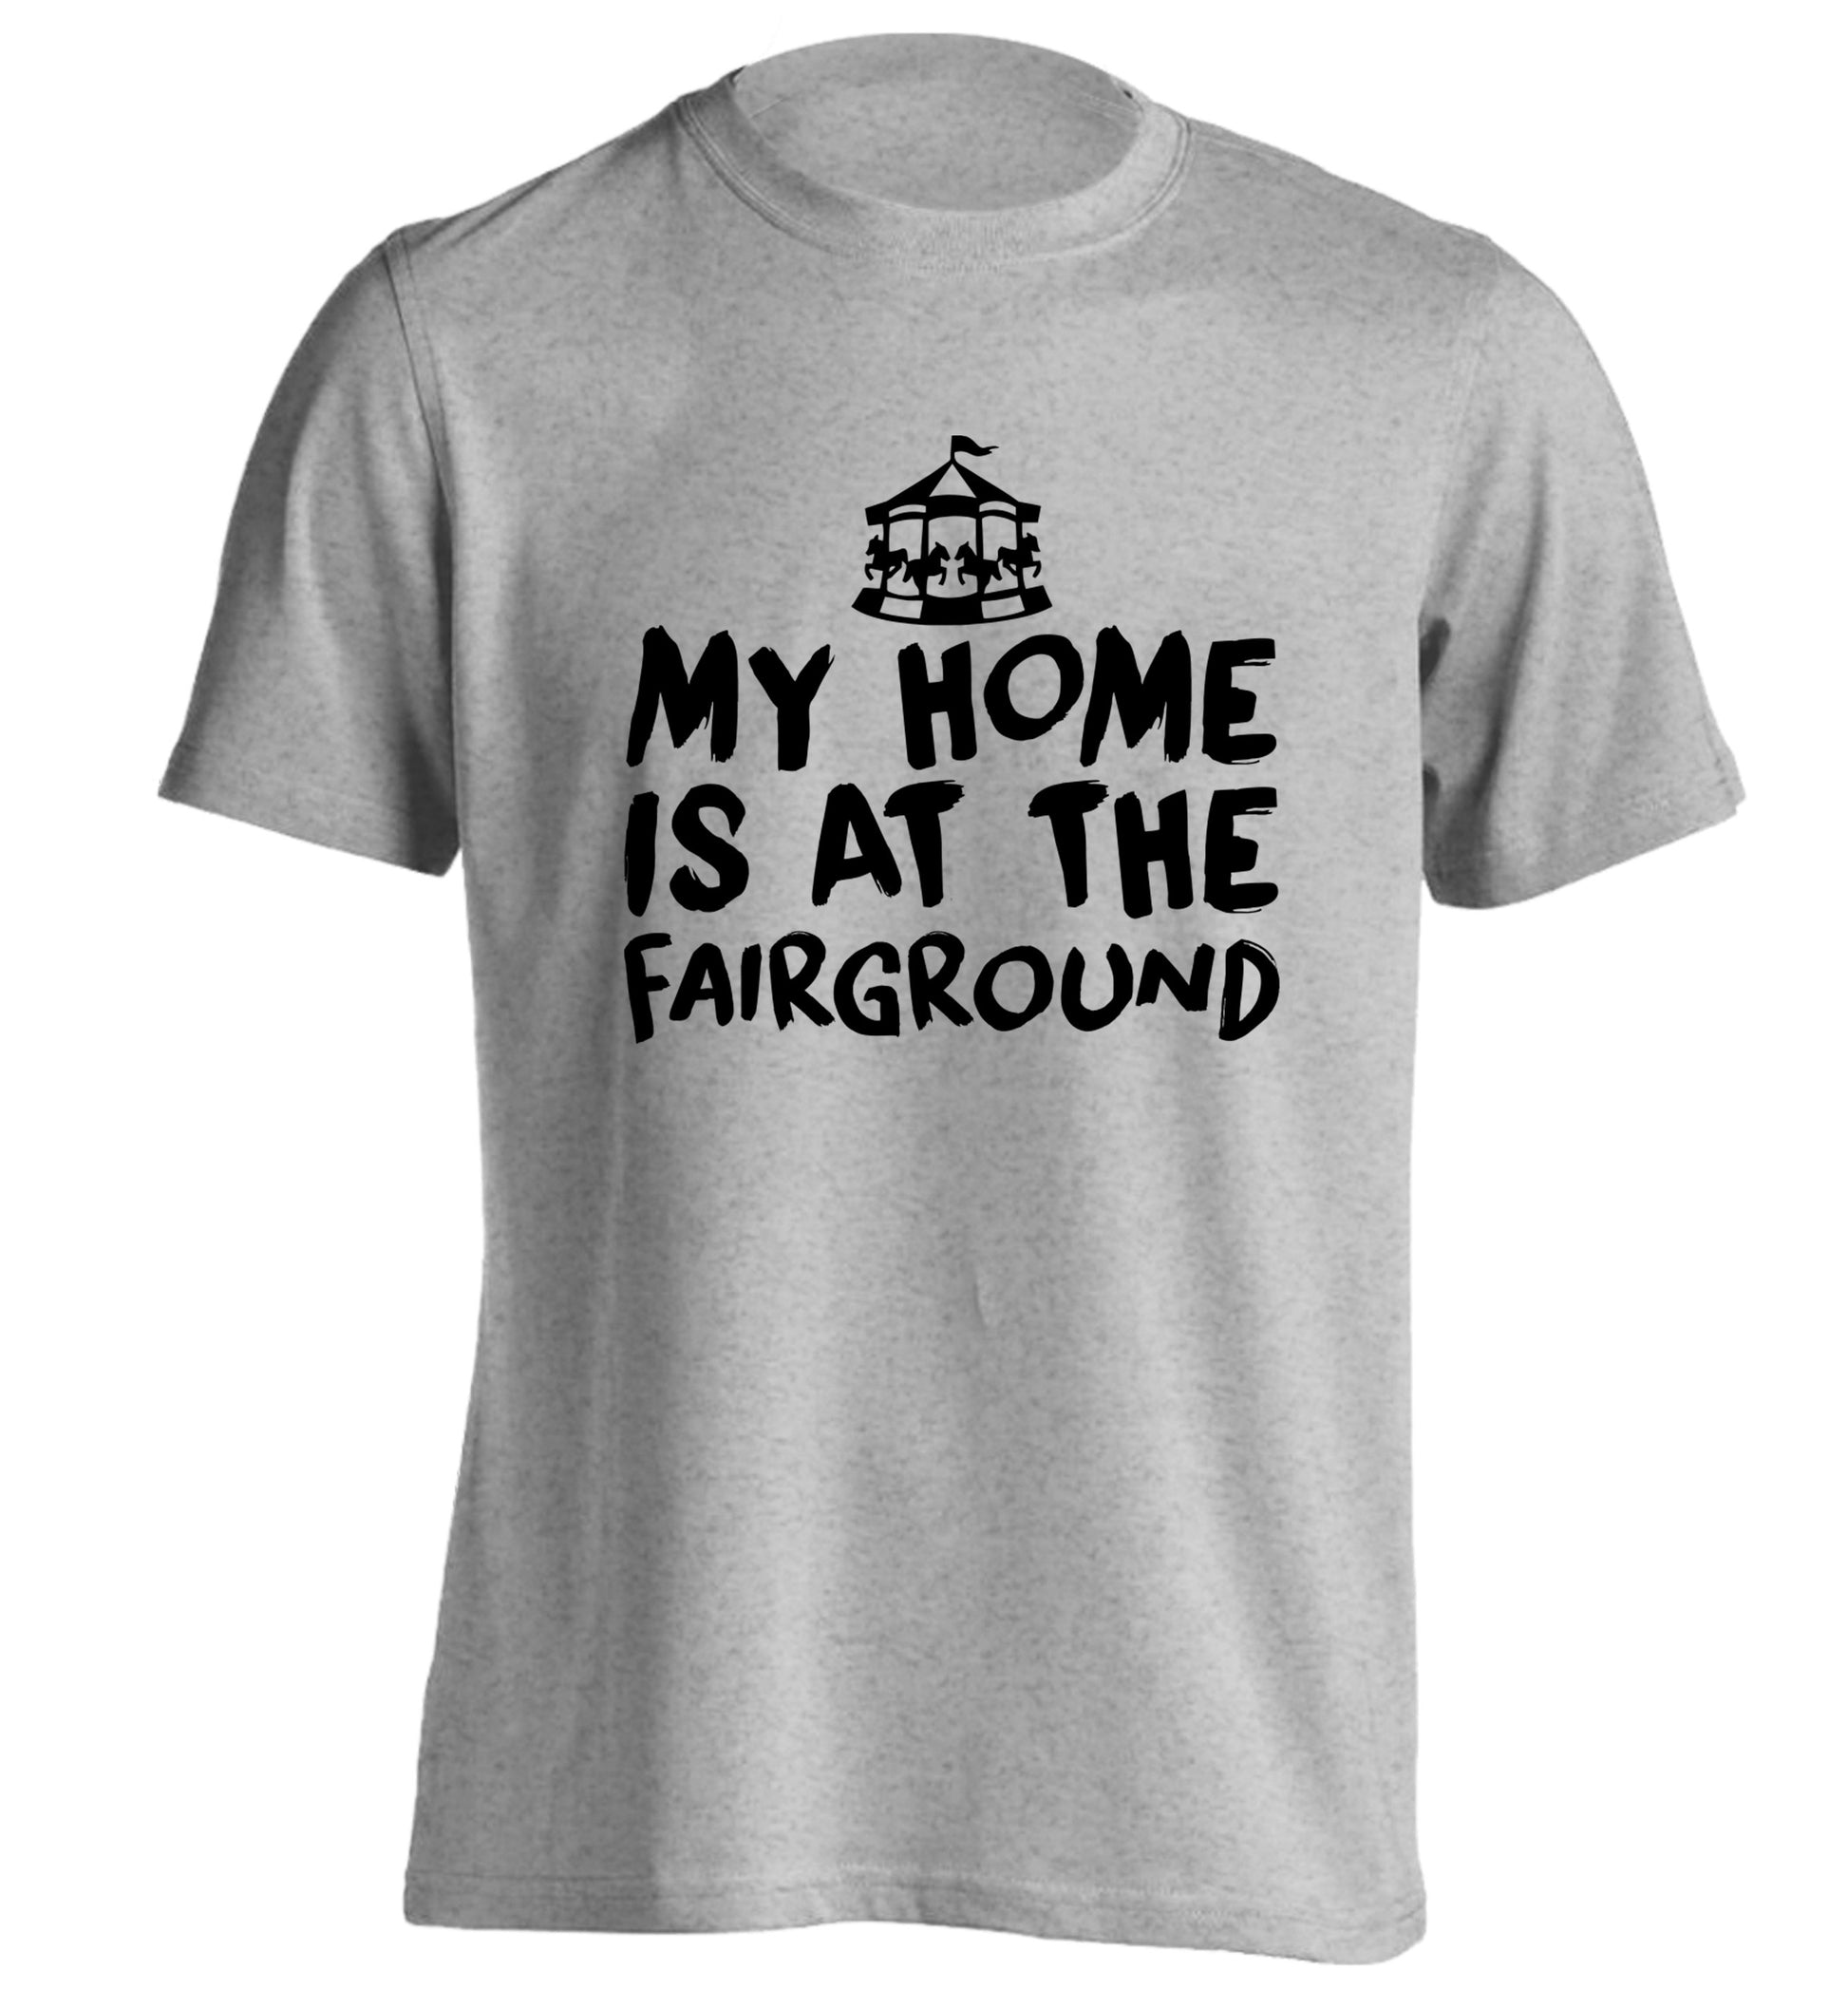 My home is at the fairground adults unisex grey Tshirt 2XL